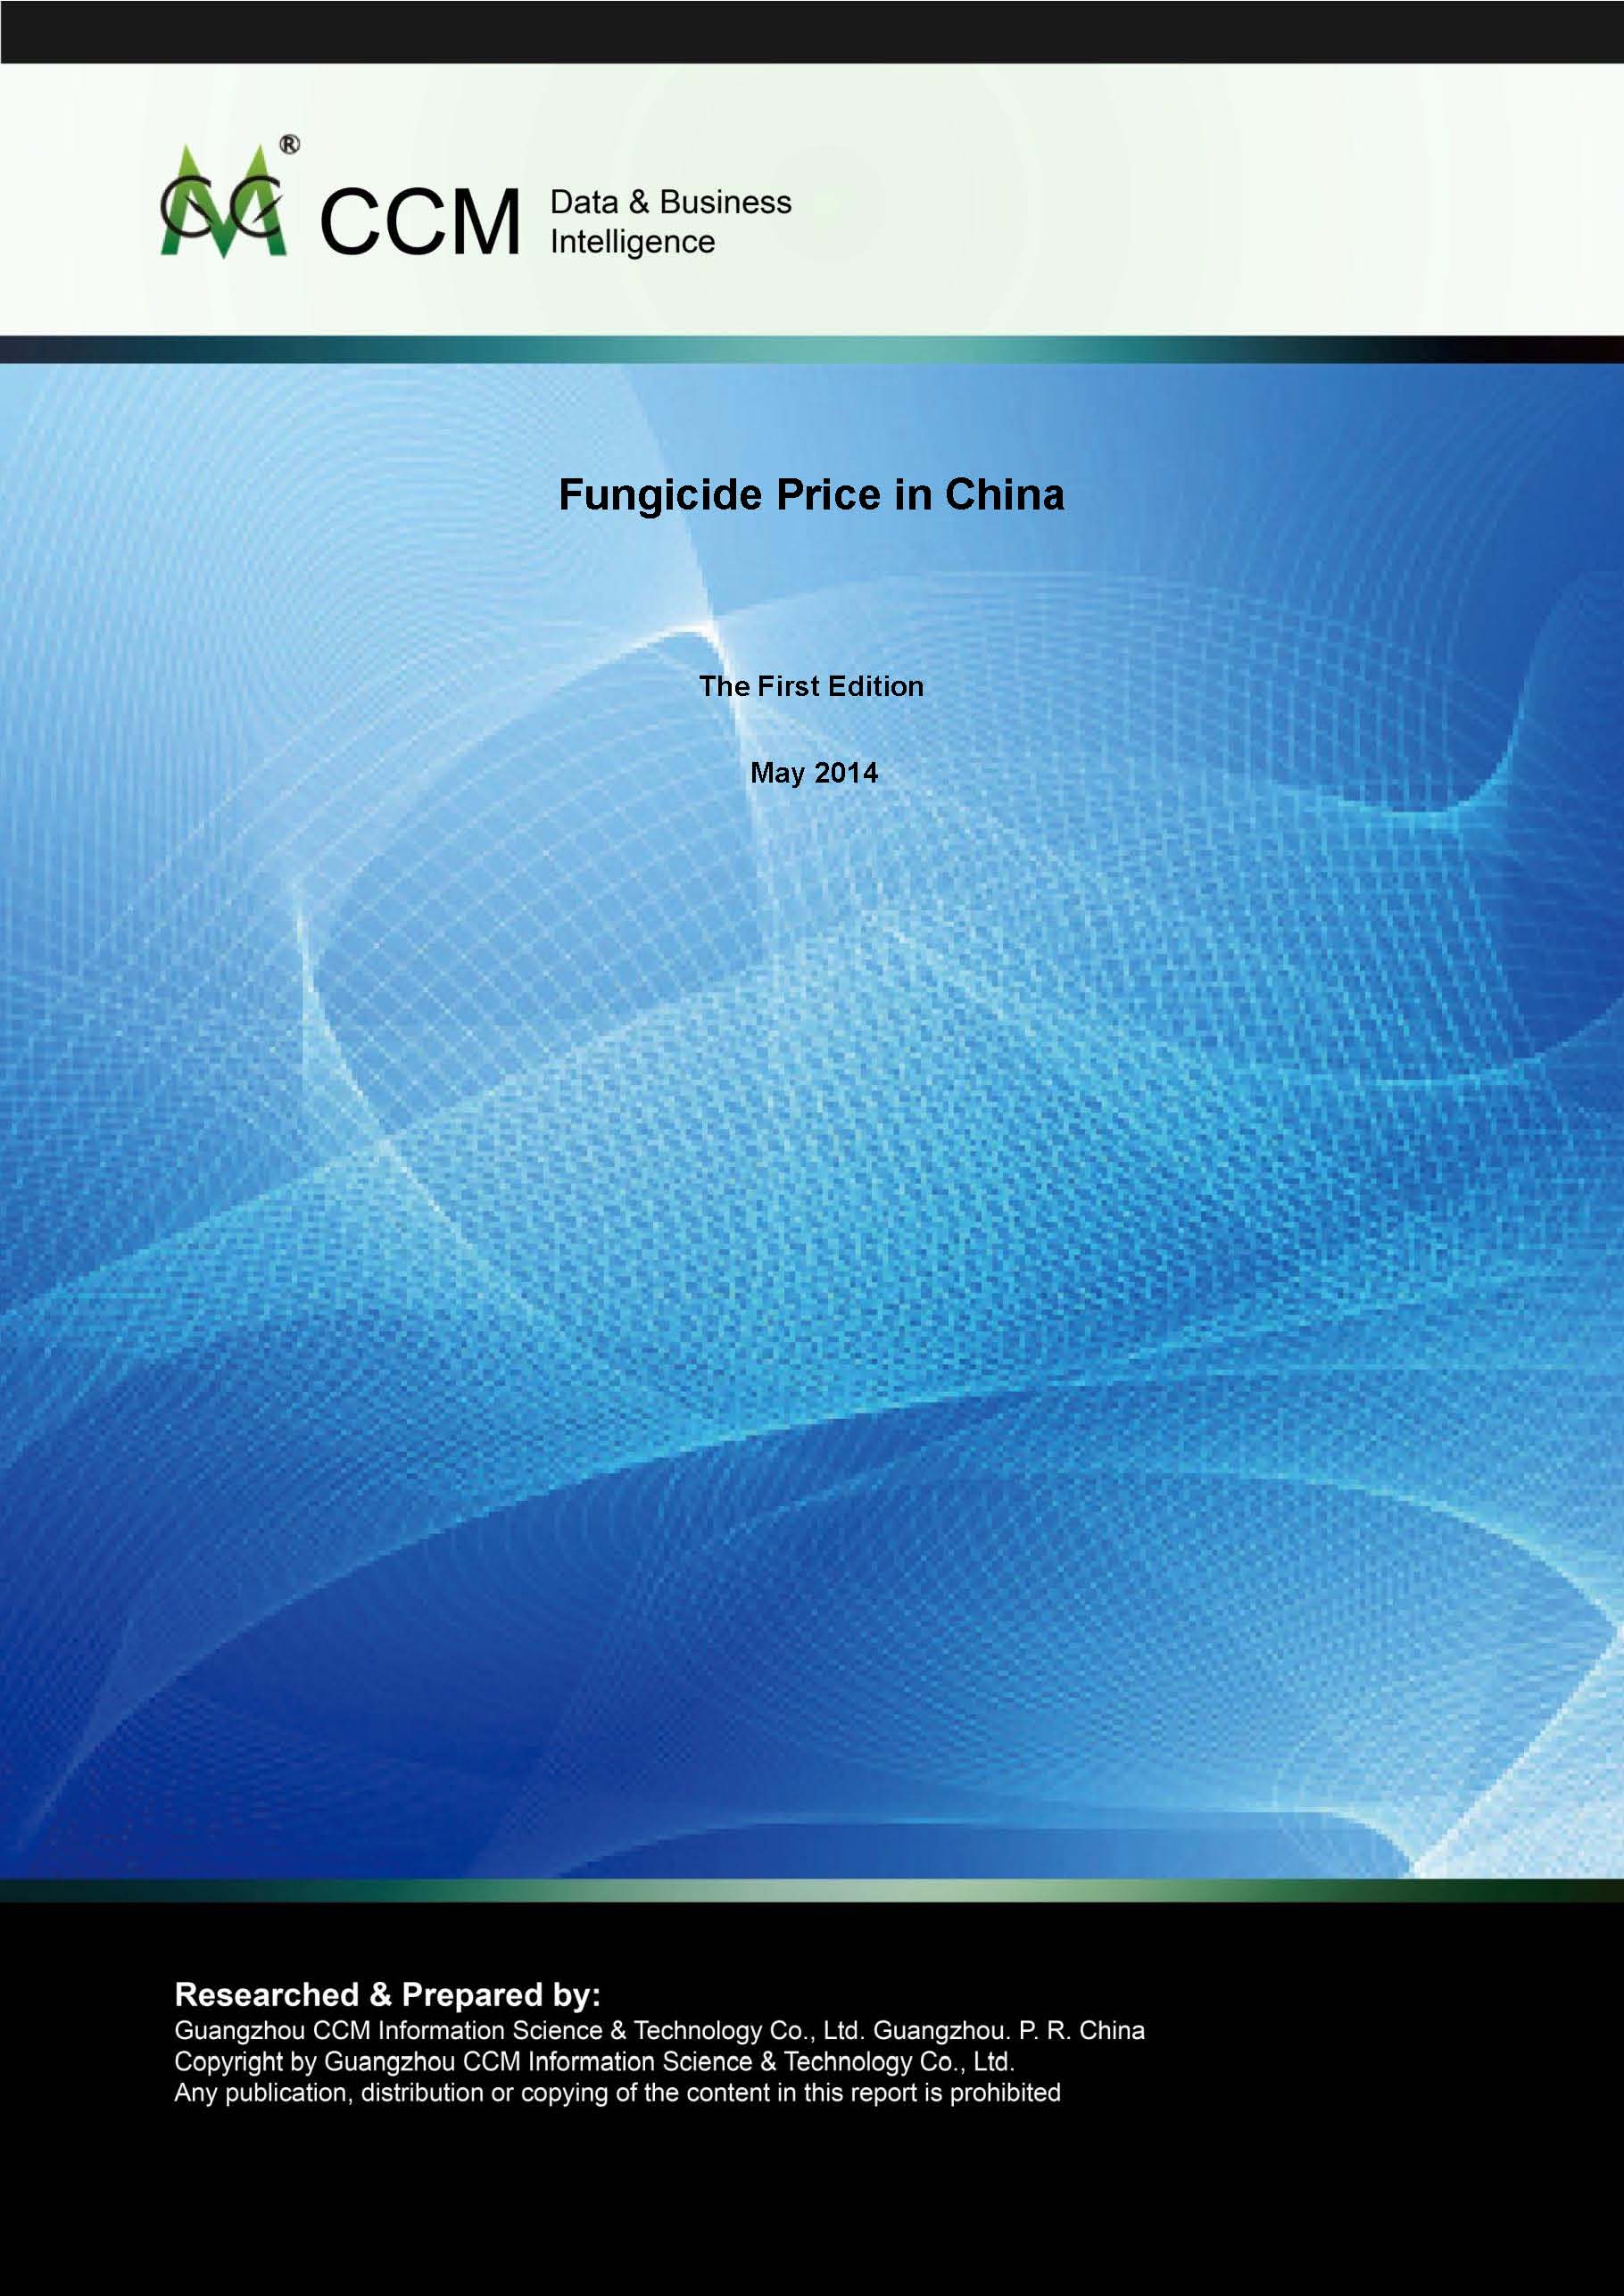 Fungicide Price in China